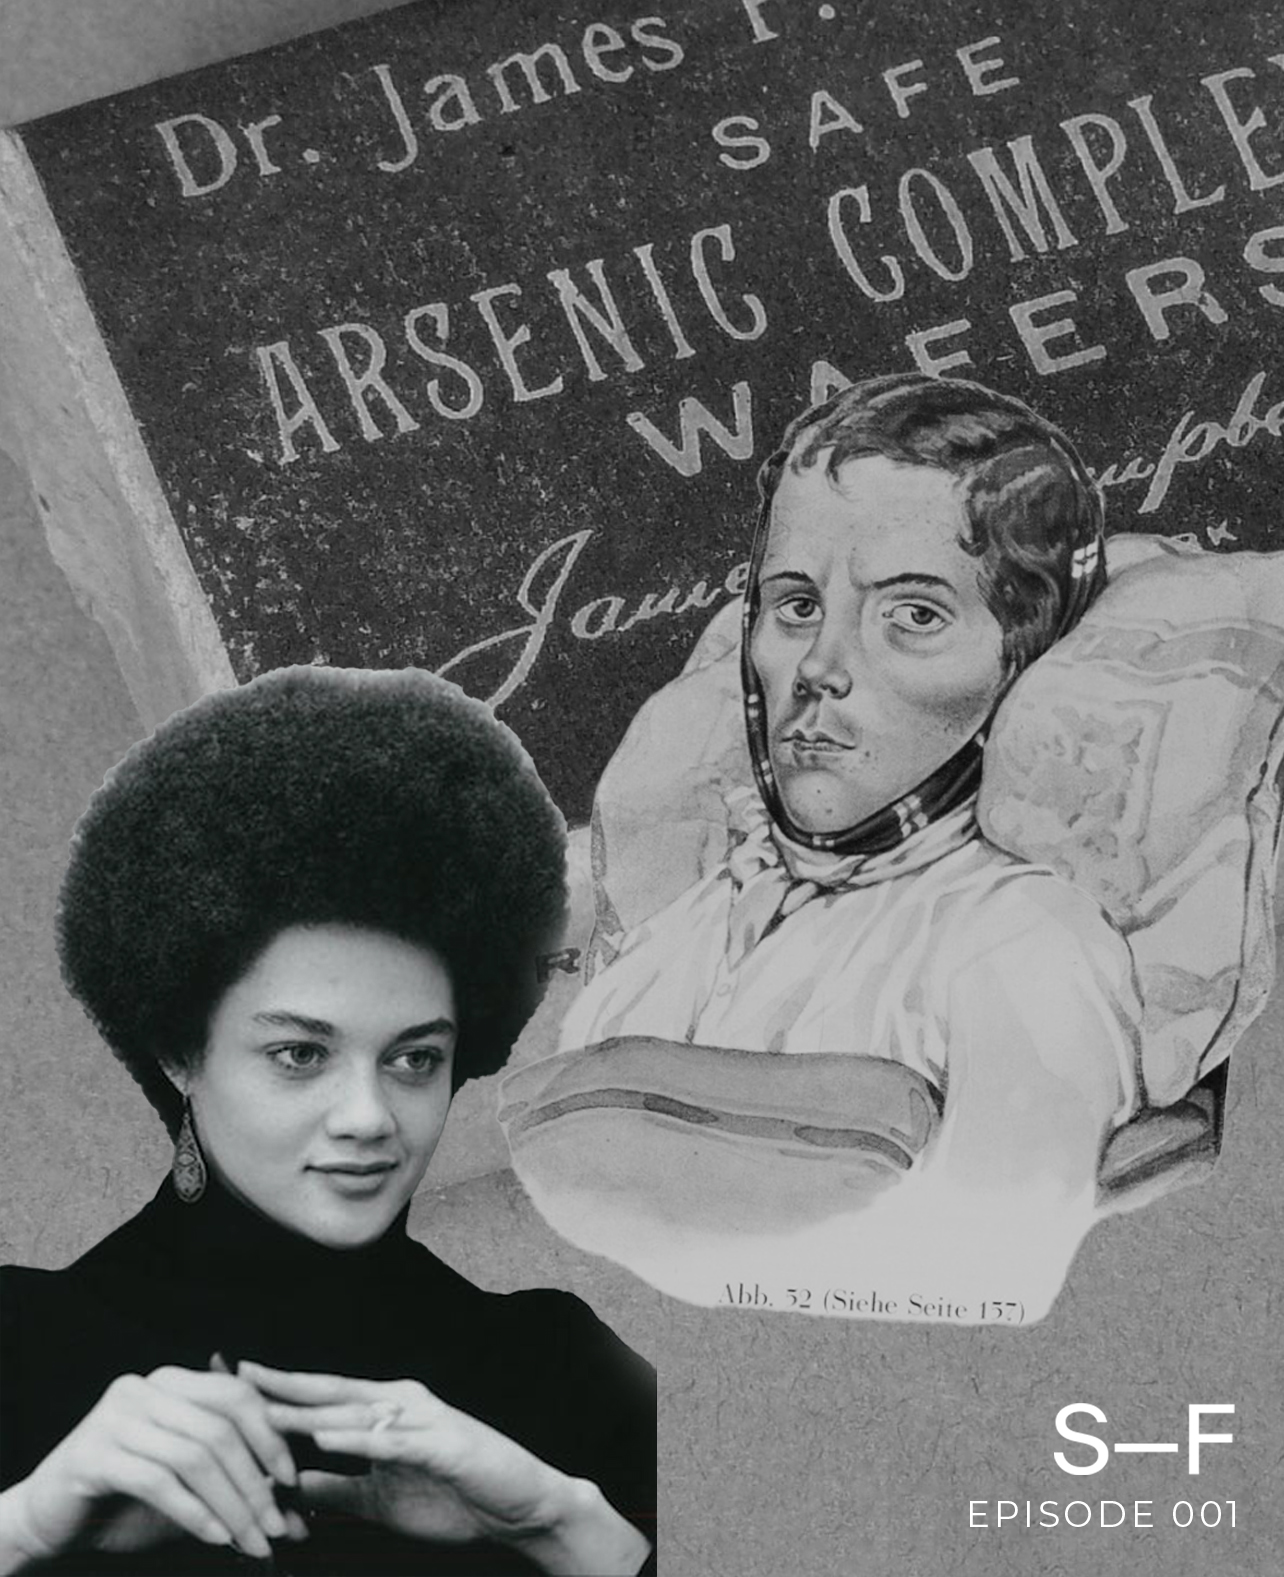 Former Black Panther Kathleen Cleaver in the foreground with an illustration of a tuberculosis patient and a photo of arsenic complexion wafers in the background